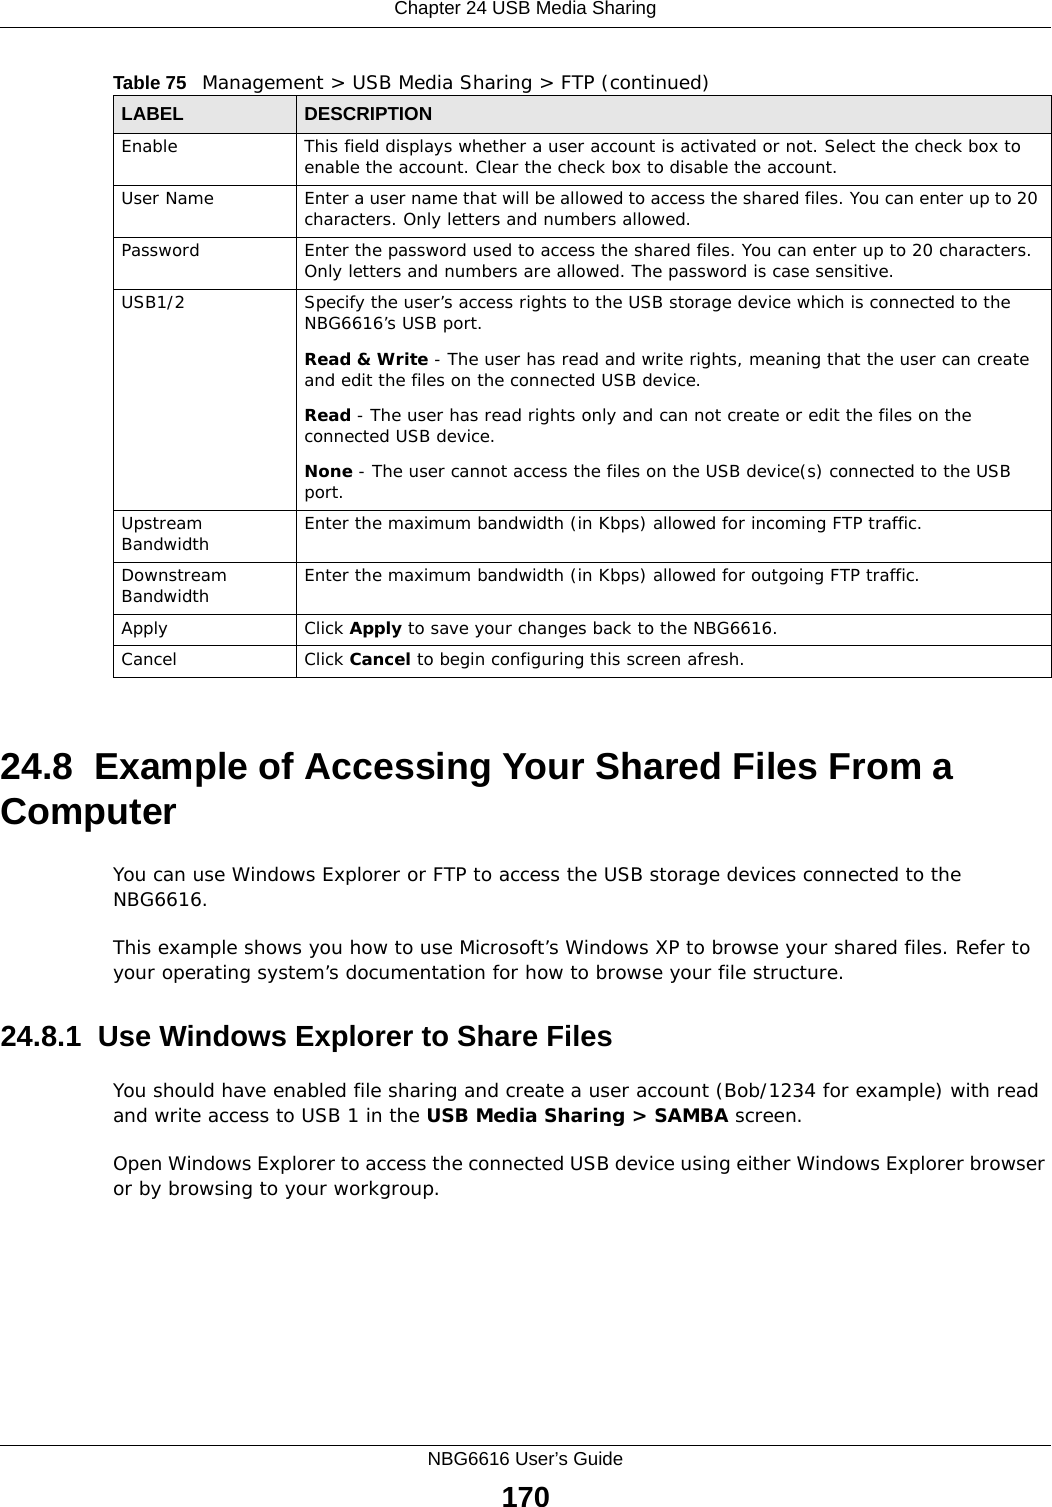 Chapter 24 USB Media SharingNBG6616 User’s Guide17024.8  Example of Accessing Your Shared Files From a Computer You can use Windows Explorer or FTP to access the USB storage devices connected to the NBG6616.This example shows you how to use Microsoft’s Windows XP to browse your shared files. Refer to your operating system’s documentation for how to browse your file structure. 24.8.1  Use Windows Explorer to Share Files You should have enabled file sharing and create a user account (Bob/1234 for example) with read and write access to USB 1 in the USB Media Sharing &gt; SAMBA screen.Open Windows Explorer to access the connected USB device using either Windows Explorer browser or by browsing to your workgroup.Enable This field displays whether a user account is activated or not. Select the check box to enable the account. Clear the check box to disable the account.User Name Enter a user name that will be allowed to access the shared files. You can enter up to 20 characters. Only letters and numbers allowed.Password Enter the password used to access the shared files. You can enter up to 20 characters. Only letters and numbers are allowed. The password is case sensitive.USB1/2 Specify the user’s access rights to the USB storage device which is connected to the NBG6616’s USB port.Read &amp; Write - The user has read and write rights, meaning that the user can create and edit the files on the connected USB device.Read - The user has read rights only and can not create or edit the files on the connected USB device.None - The user cannot access the files on the USB device(s) connected to the USB port.Upstream Bandwidth Enter the maximum bandwidth (in Kbps) allowed for incoming FTP traffic.Downstream Bandwidth Enter the maximum bandwidth (in Kbps) allowed for outgoing FTP traffic.Apply Click Apply to save your changes back to the NBG6616.Cancel Click Cancel to begin configuring this screen afresh.Table 75   Management &gt; USB Media Sharing &gt; FTP (continued)LABEL DESCRIPTION